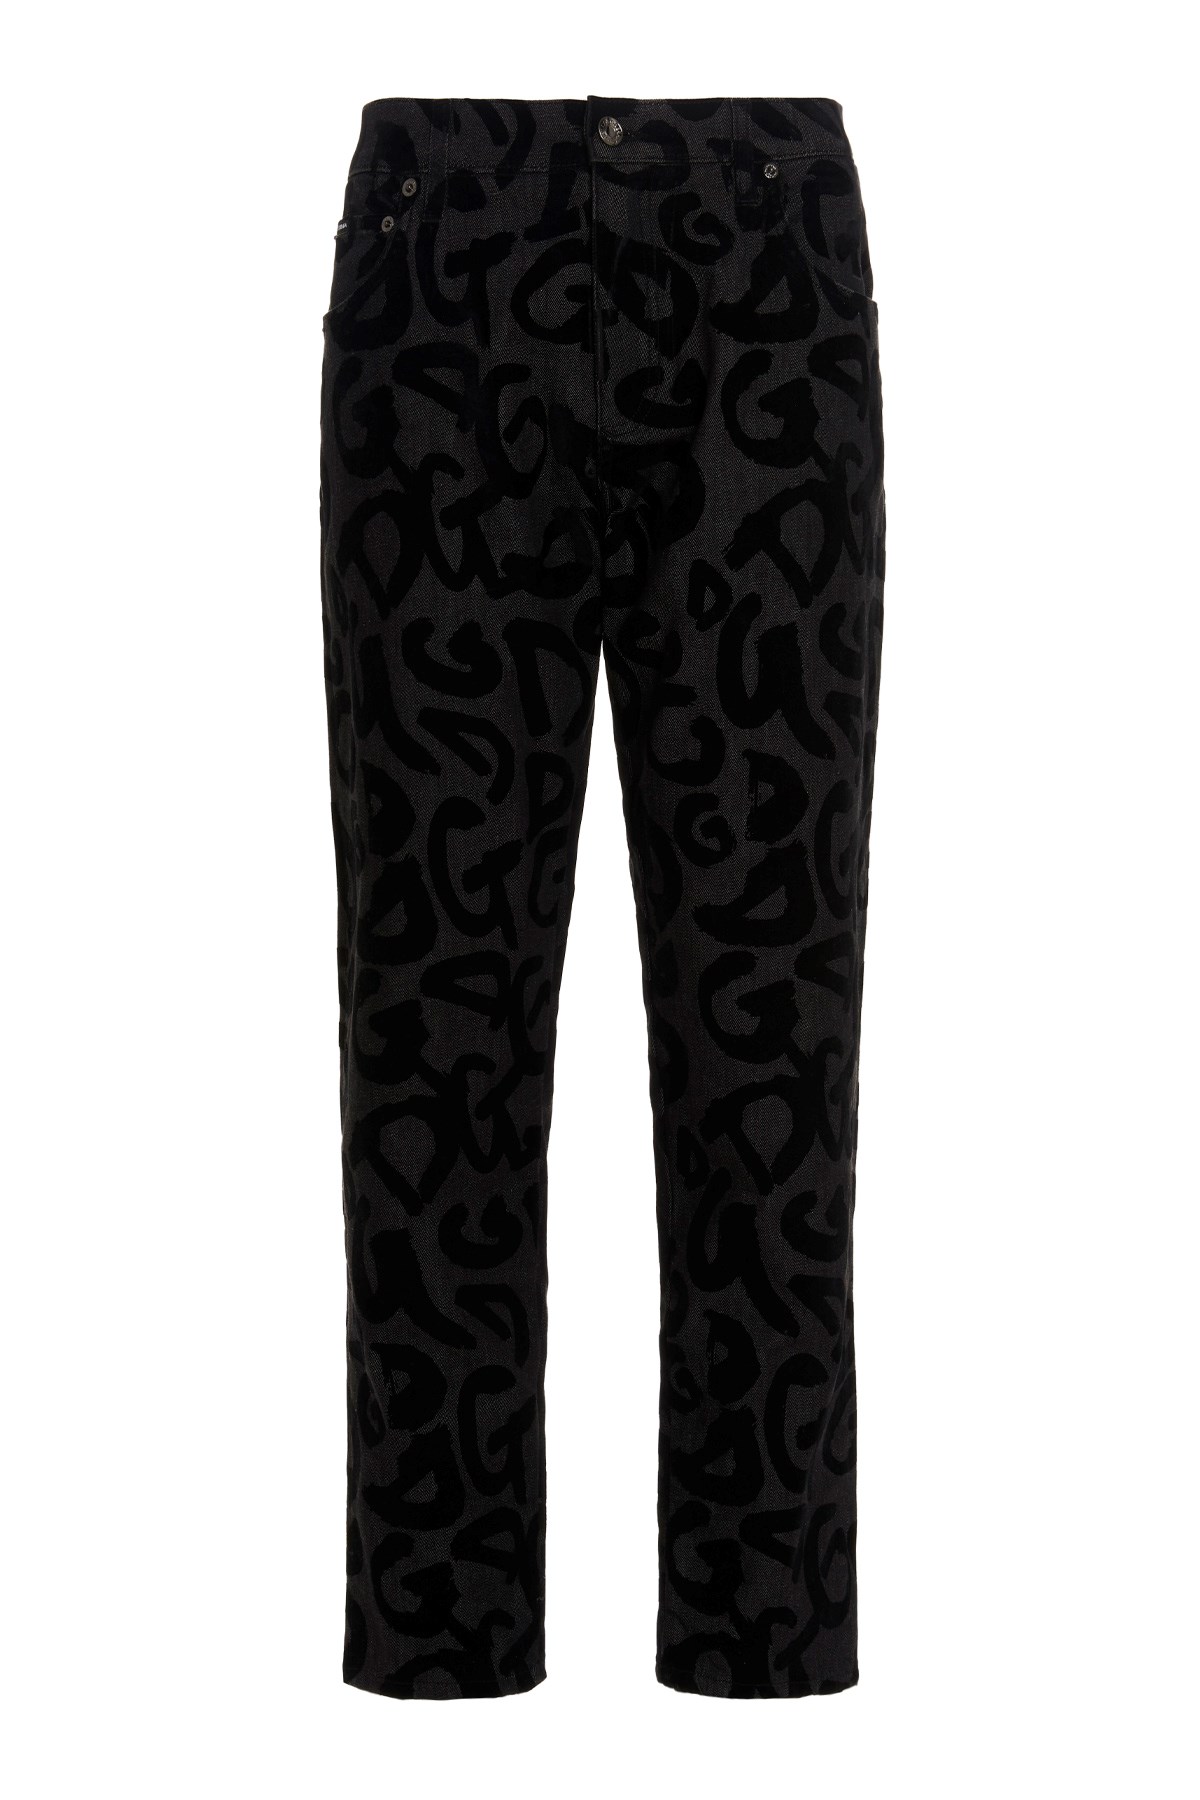 DOLCE & GABBANA All-Over Logo Print Loose Jeans